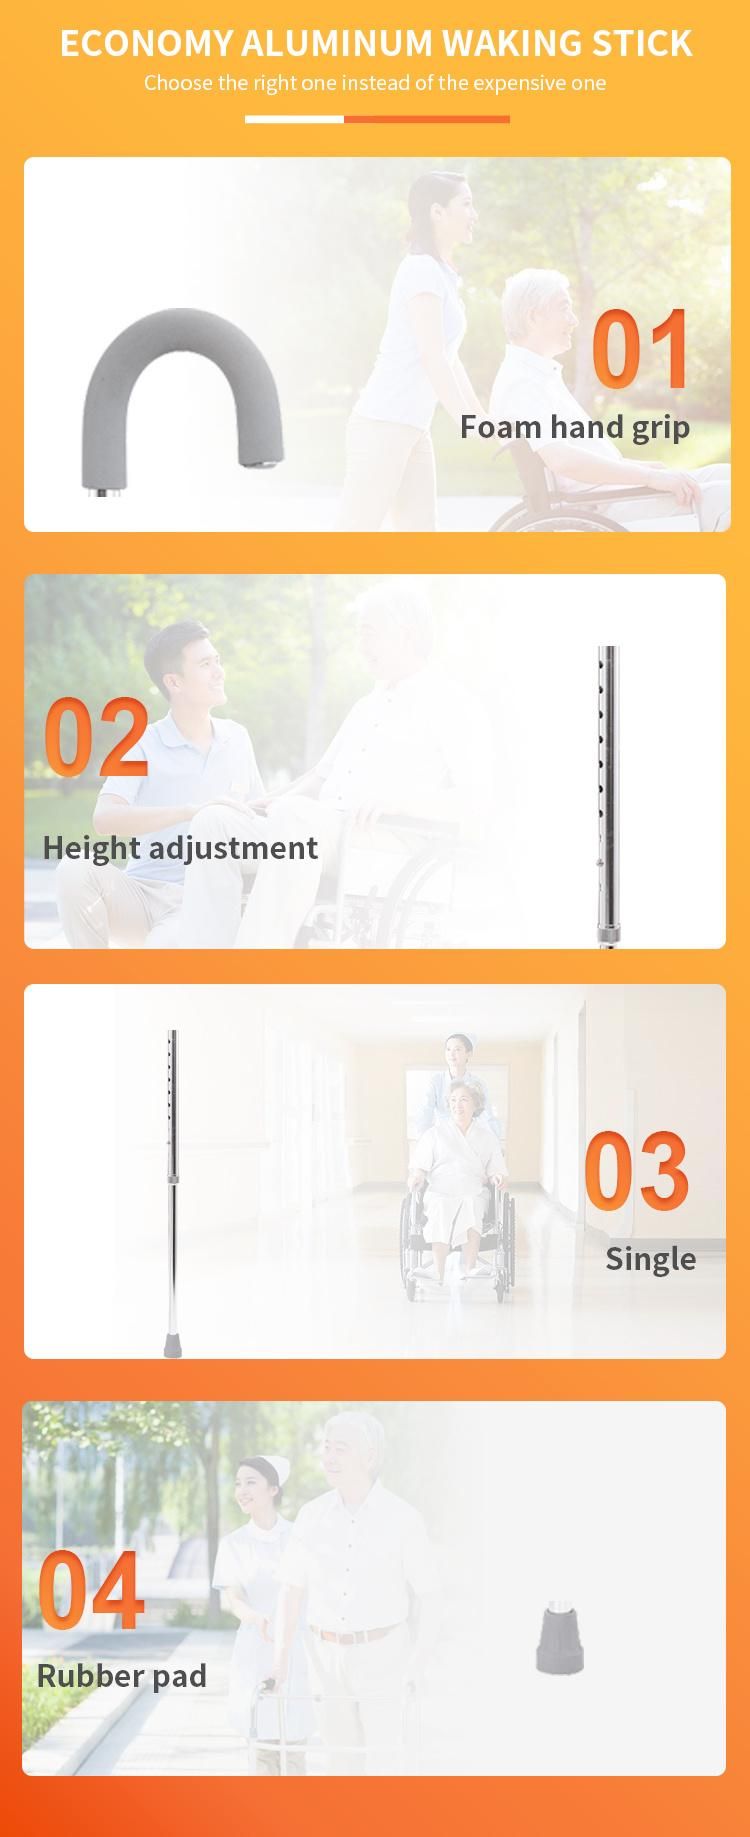 Non-Slip Comfort Foam Grip Aluminum Easy Carry portable Can Adjustable Height Walking Stick Non-Slip Foot Pad Single Cane for Elder Weight Capacity 100kgs